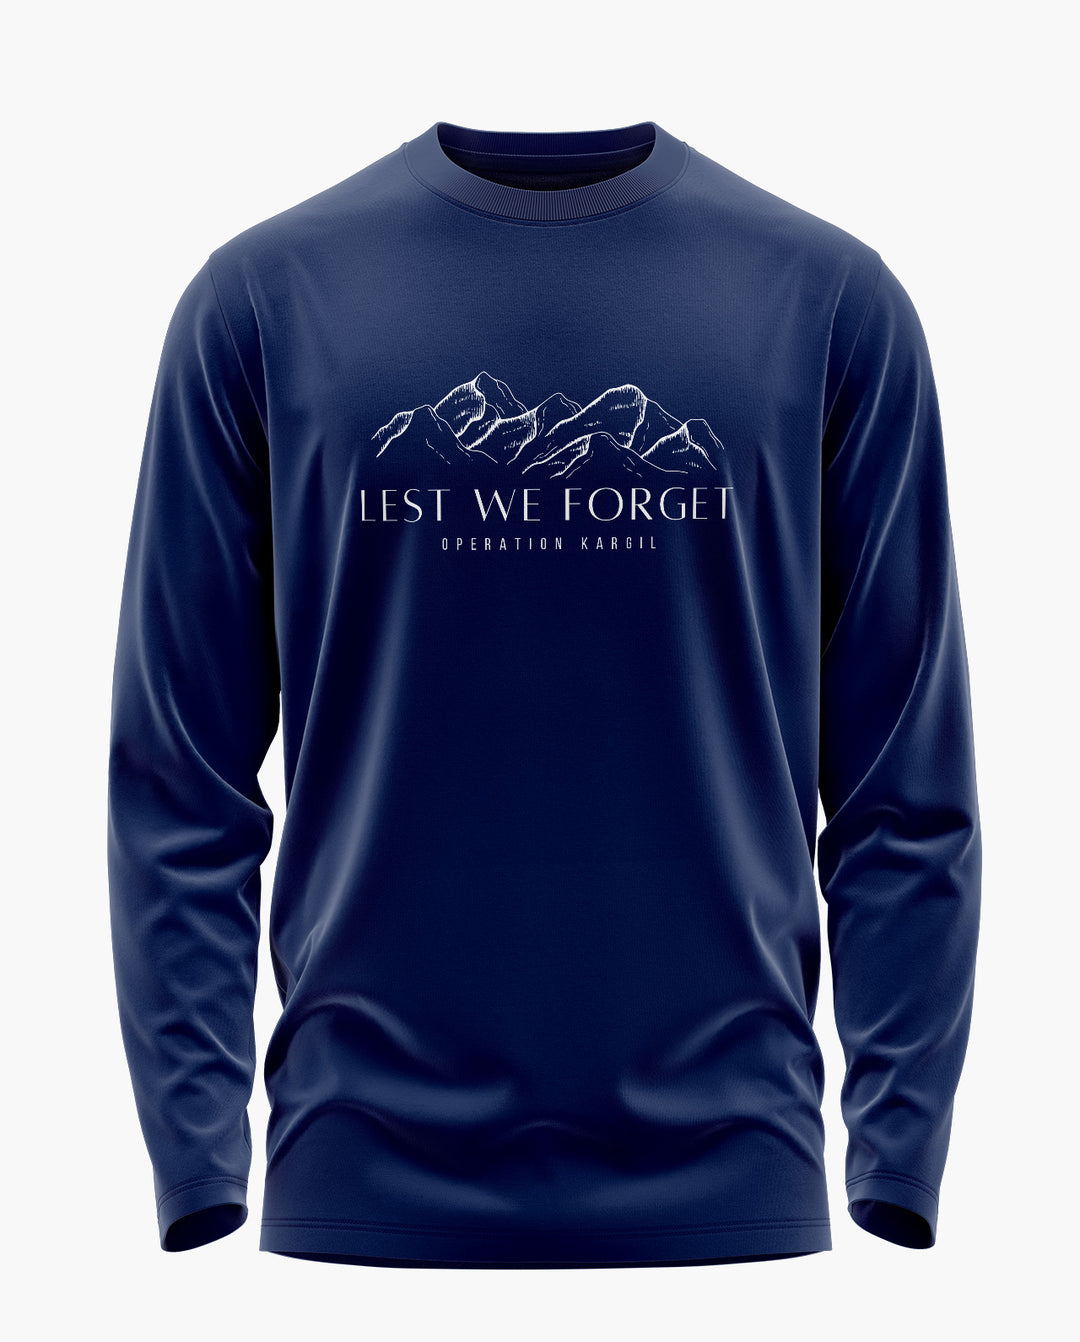 Lest we forget Full Sleeve T-Shirt